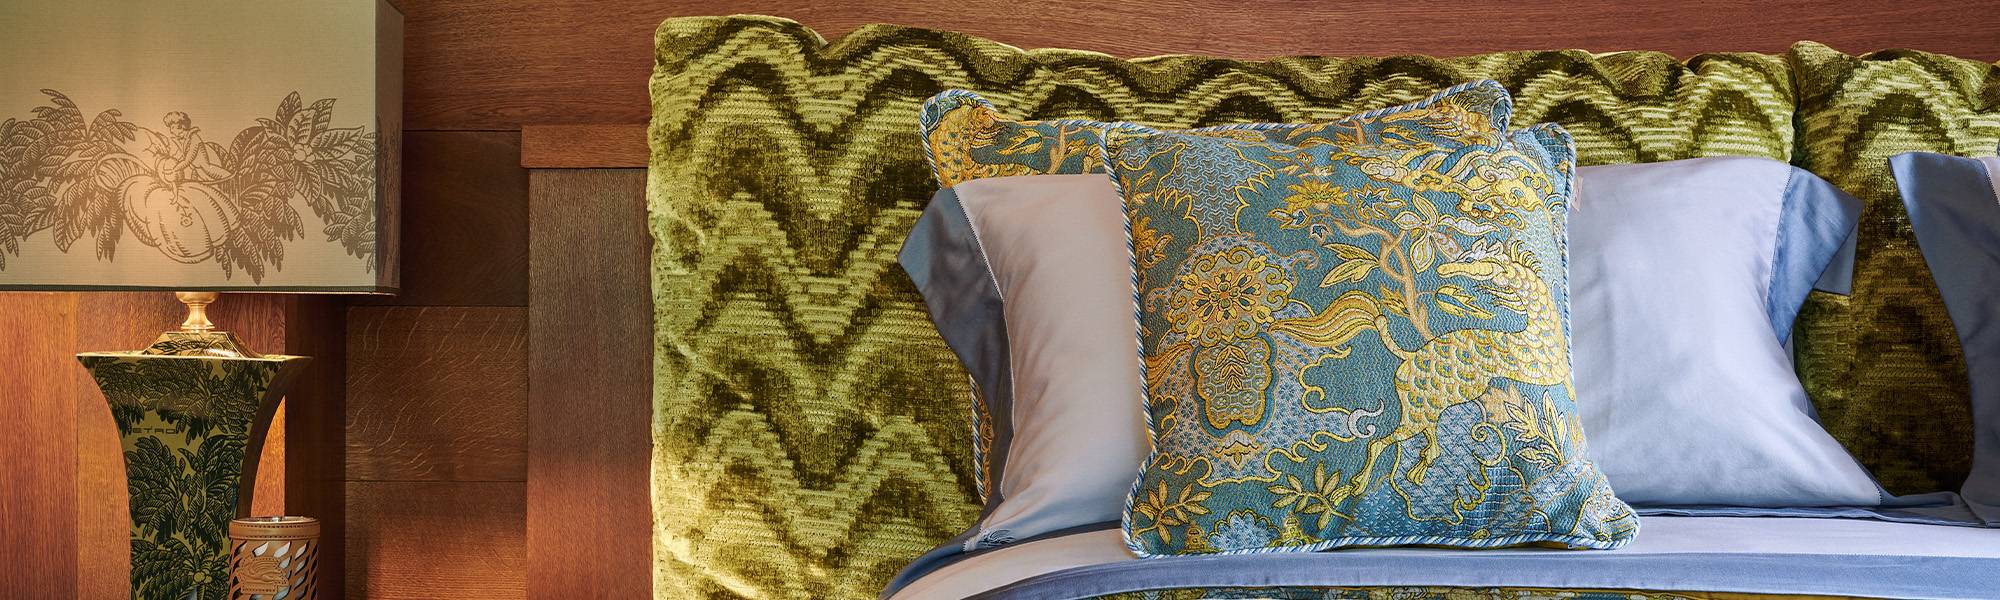 Etro Home Interiors_Beds_Banner